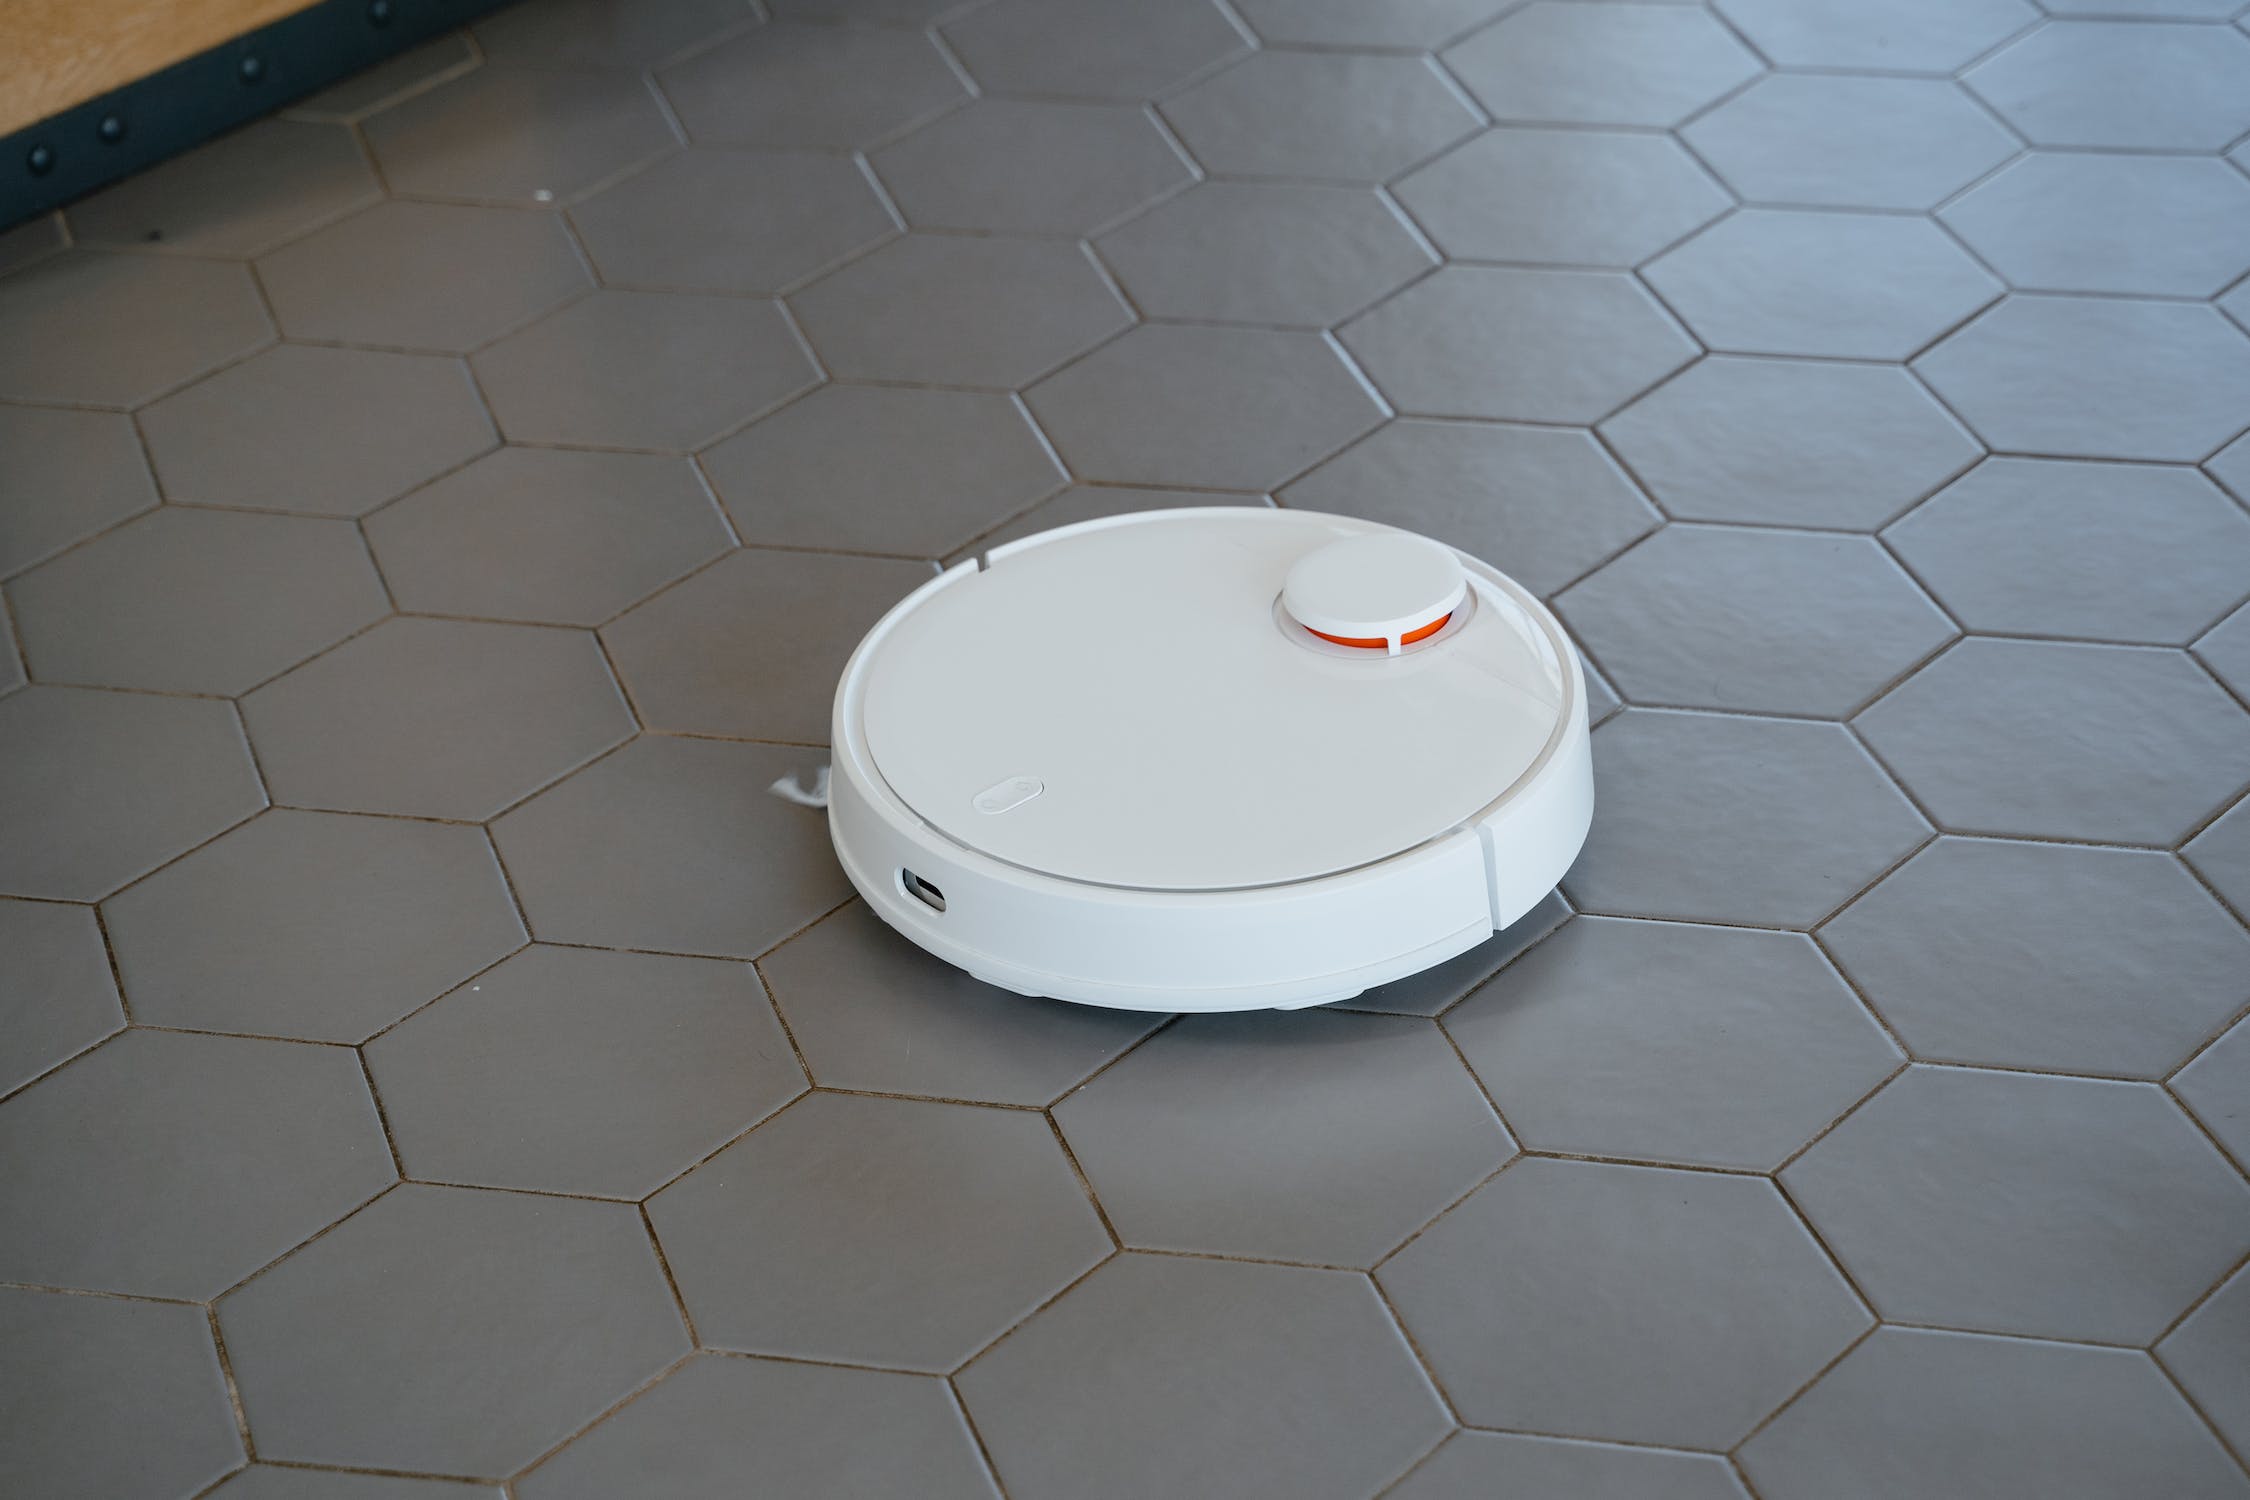 Robotic Vacuum Cleaners: The smart way to clean